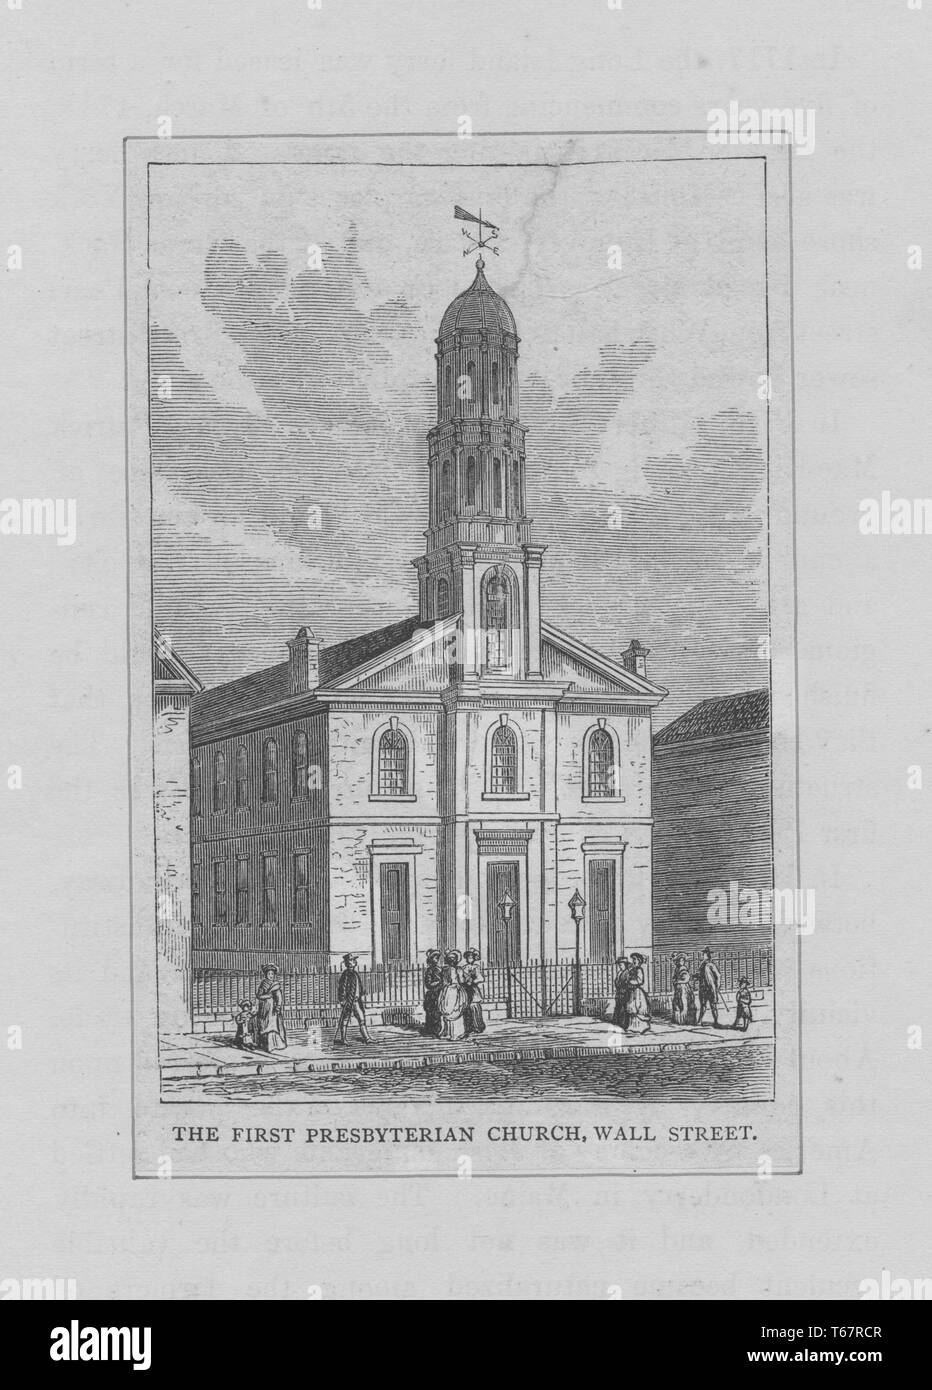 An etching depicting the First Presbyterian Church as it stood on Wall Street, New York City, New York, 1750. From the New York Public Library. Stock Photo